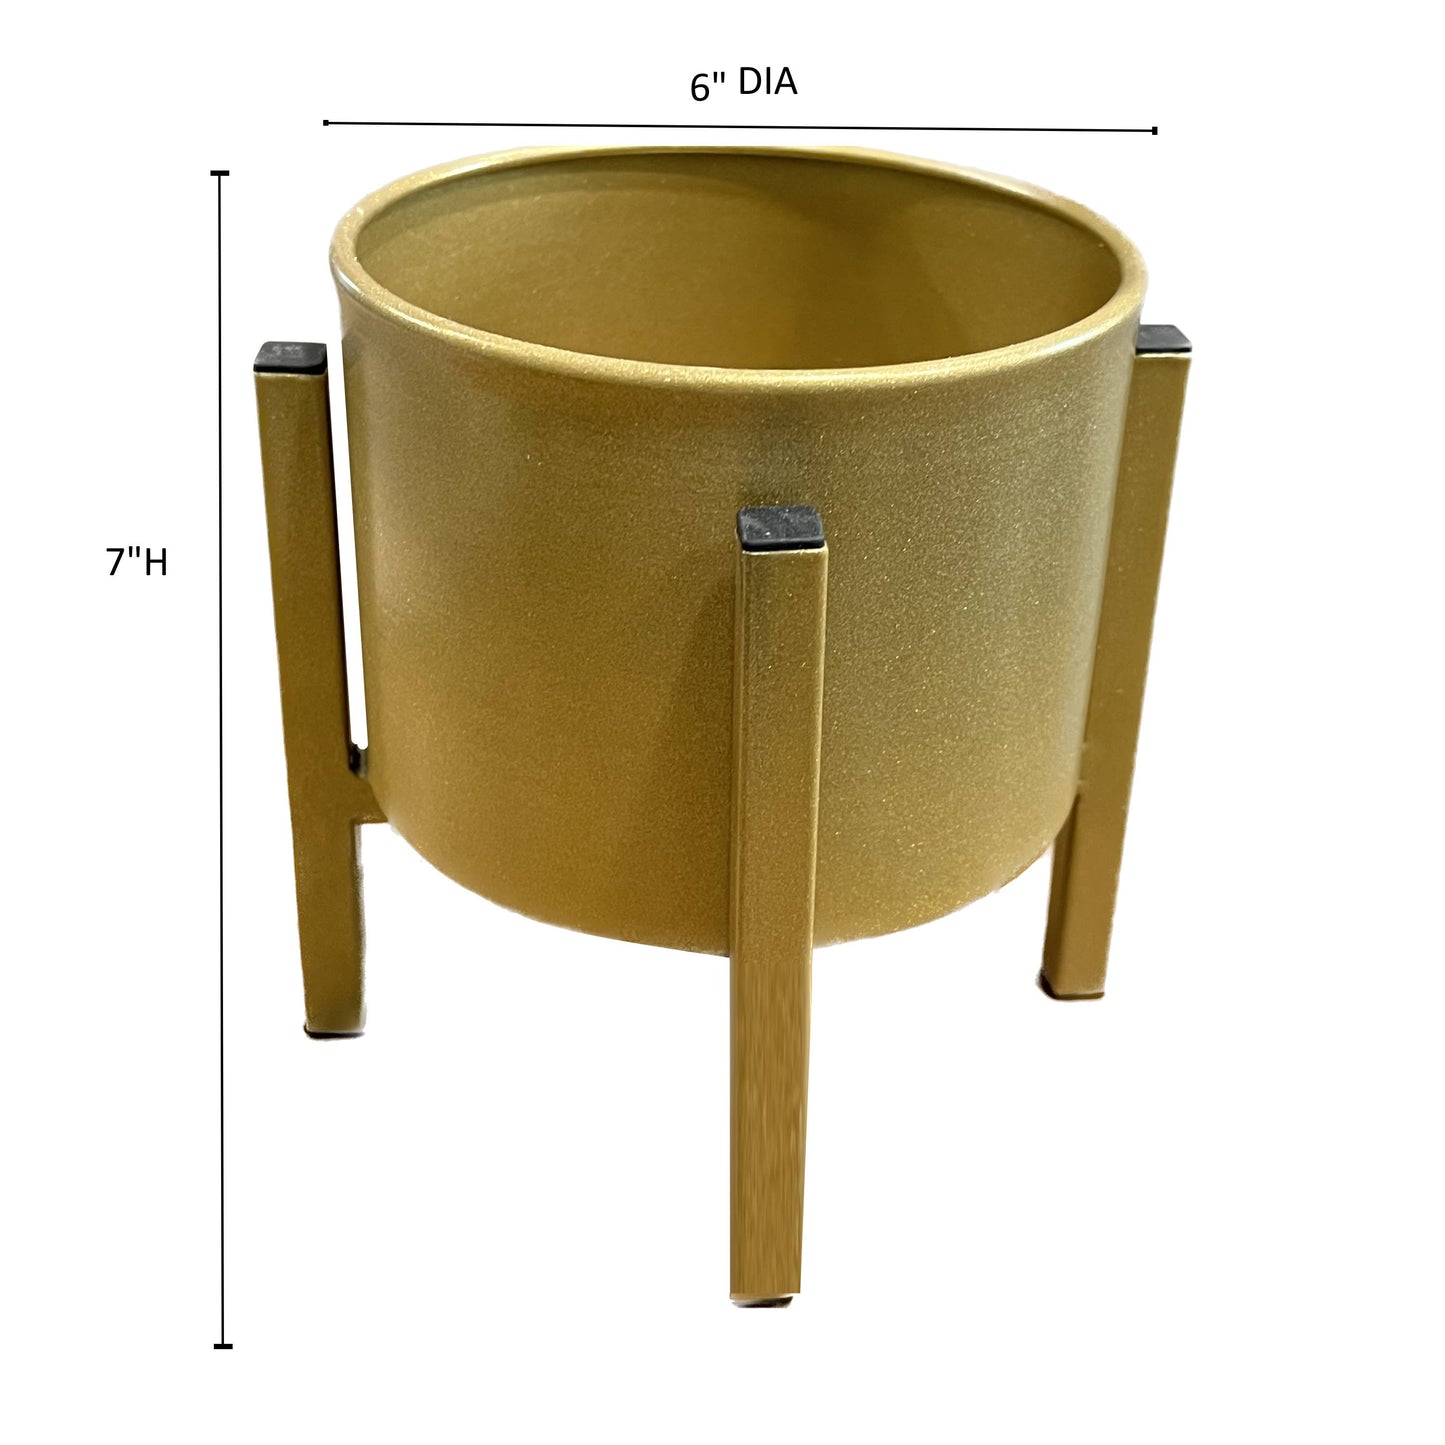 6" Gold Metal Planter with stand tabletop decor